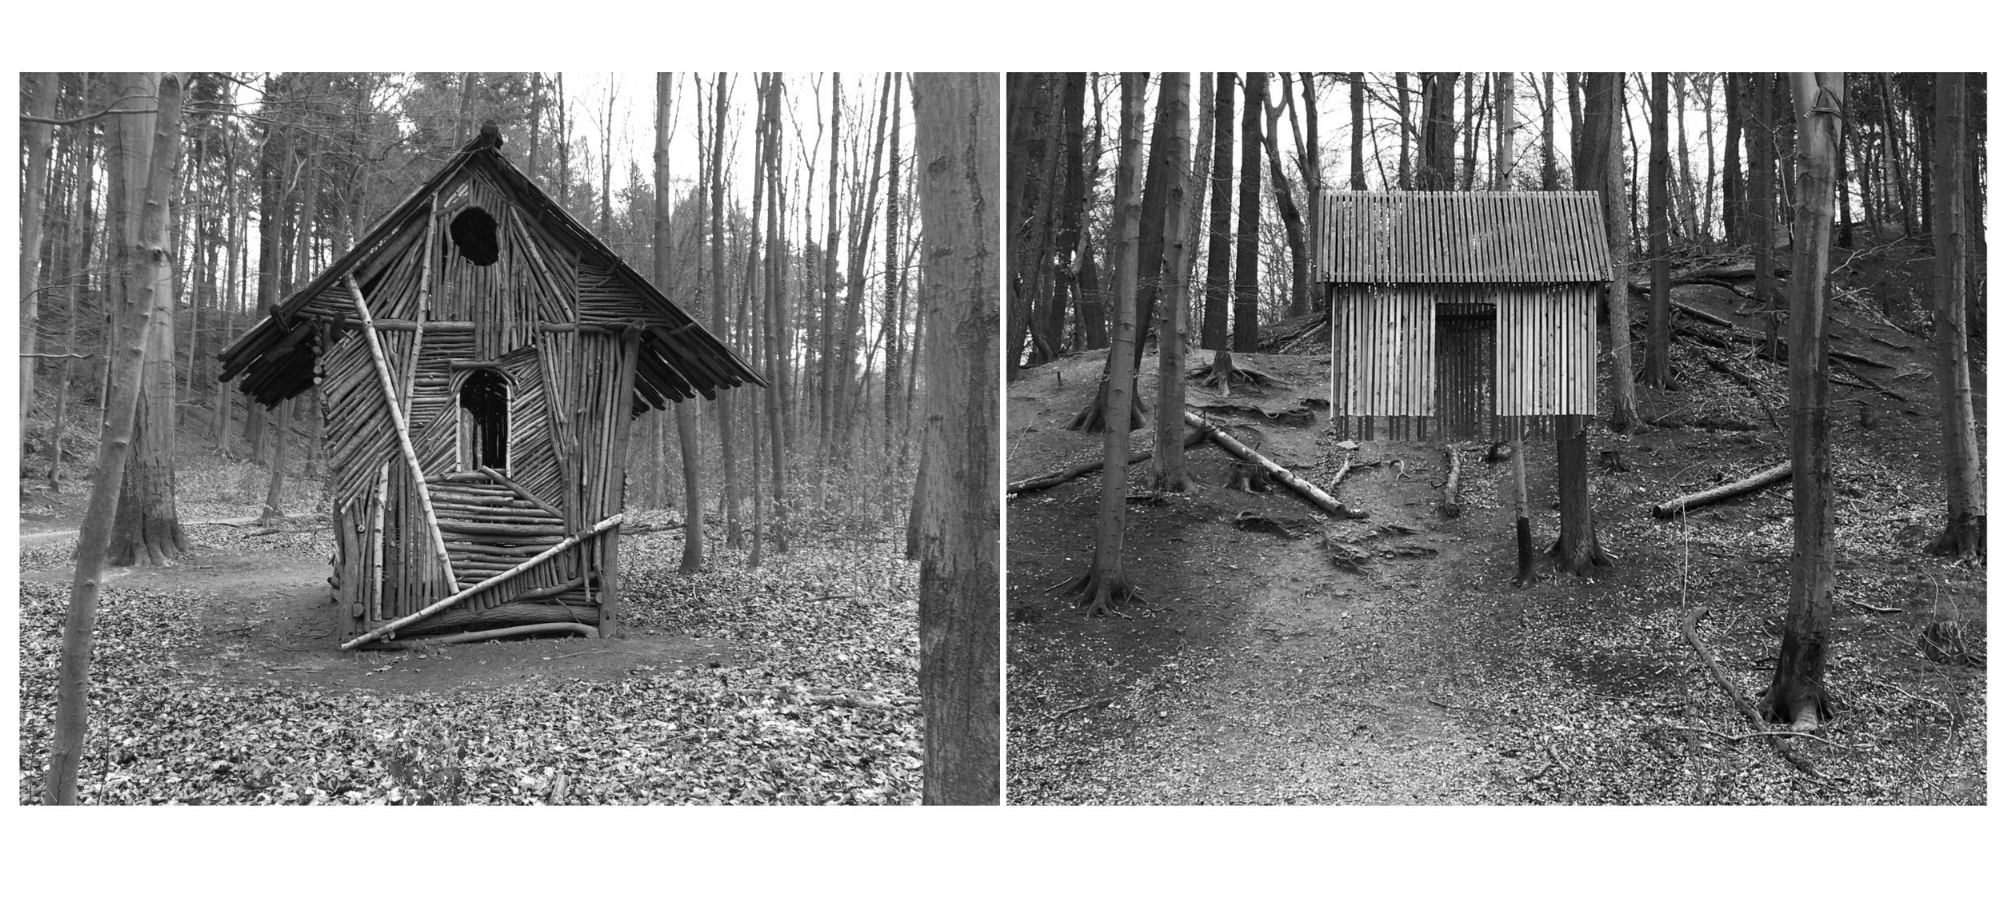 Photographs from Kunstwald Projects (The Hessian Forest) 